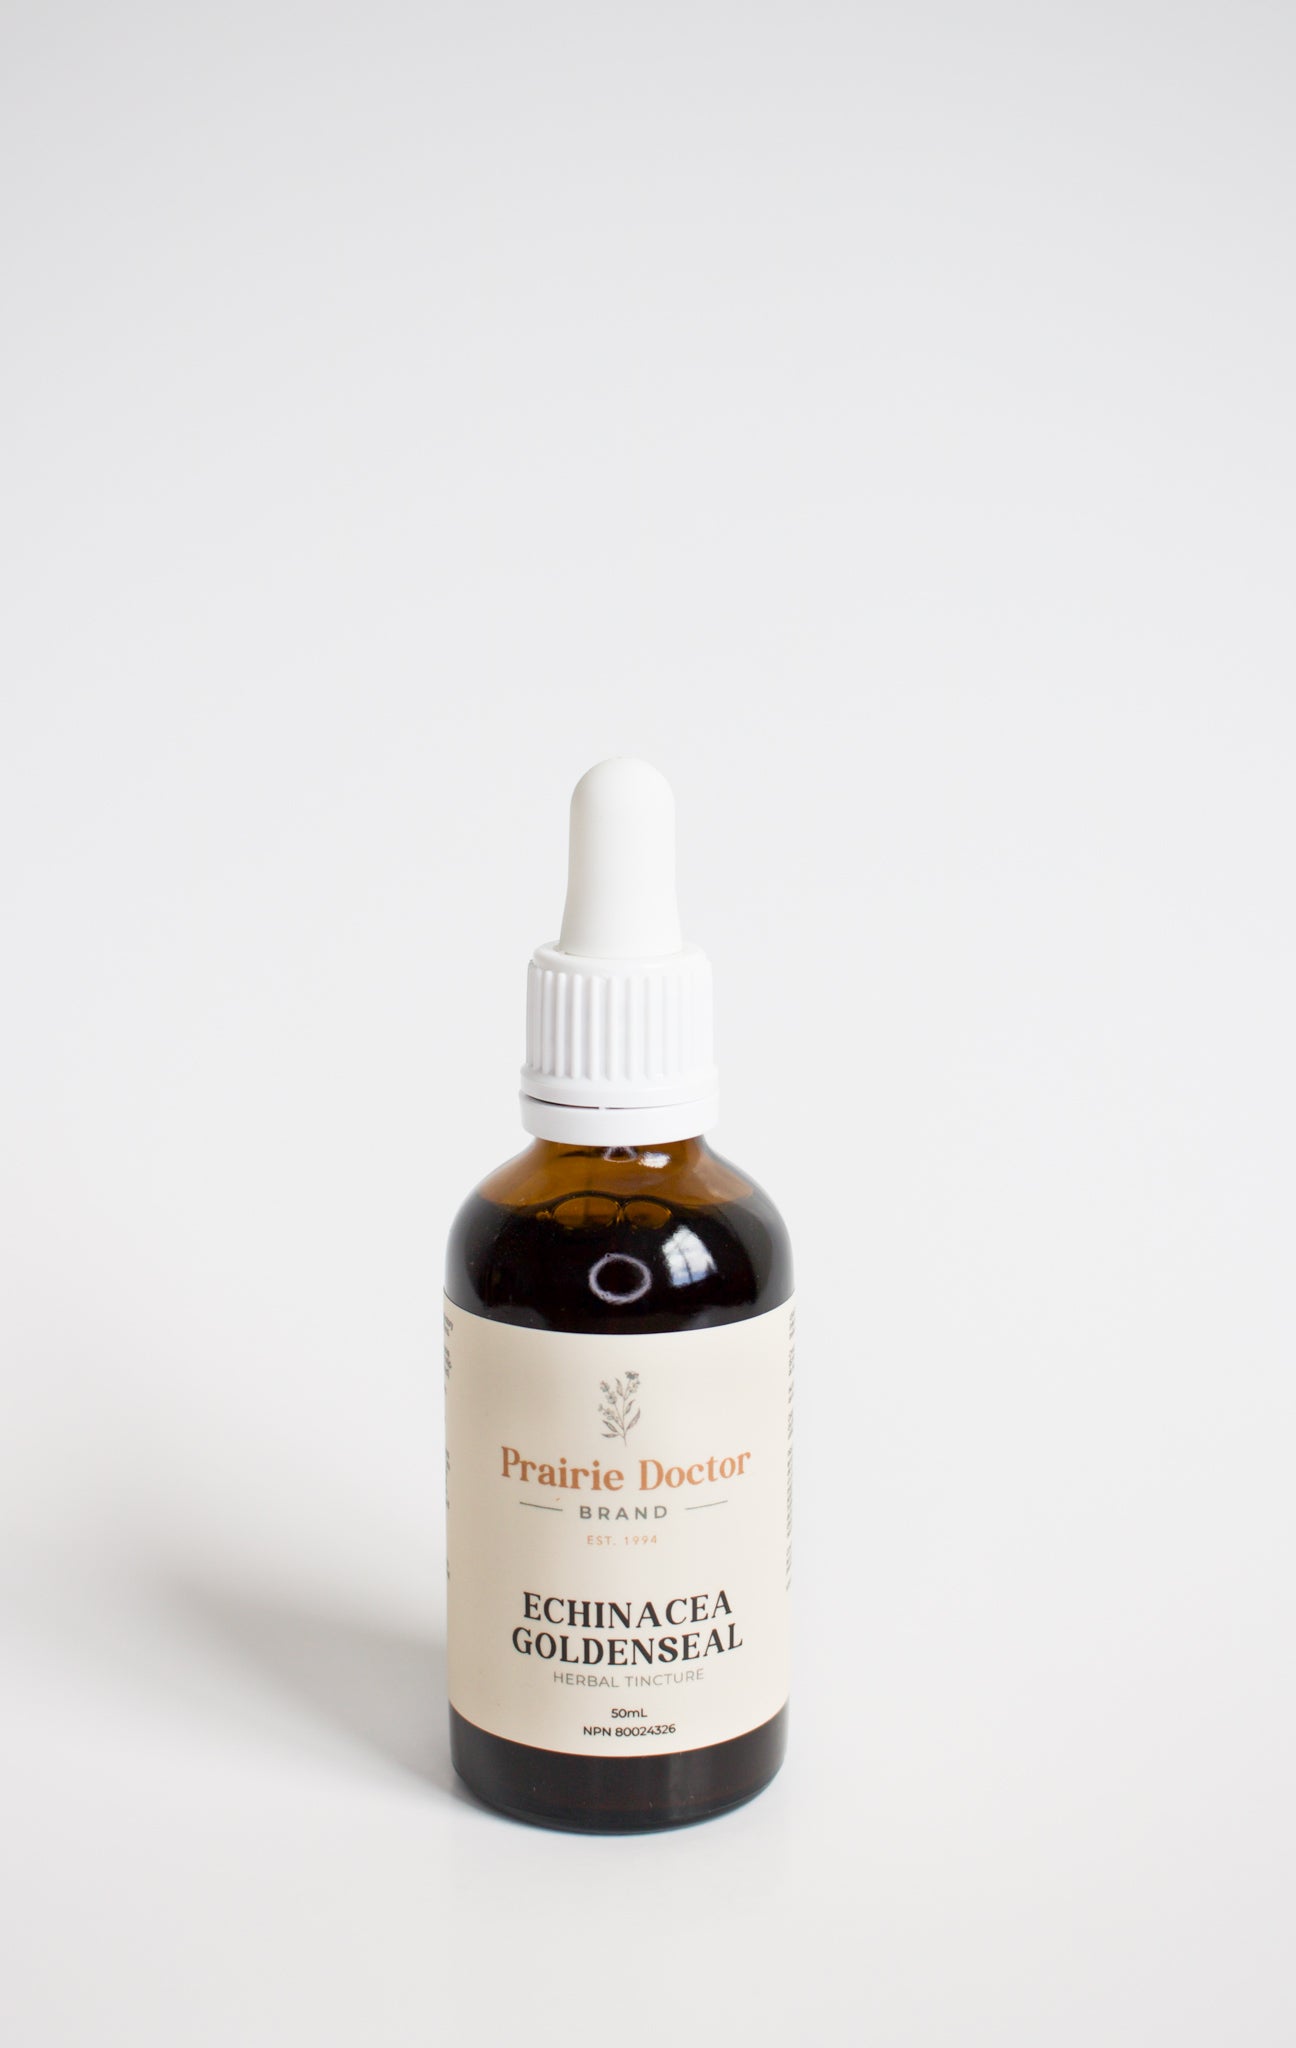 Our organic Echinacea and Goldenseal tincture has been used in Herbal Medicine to help fight off upper respiratory tract infections as well as to treat upper respiratory tract infections.